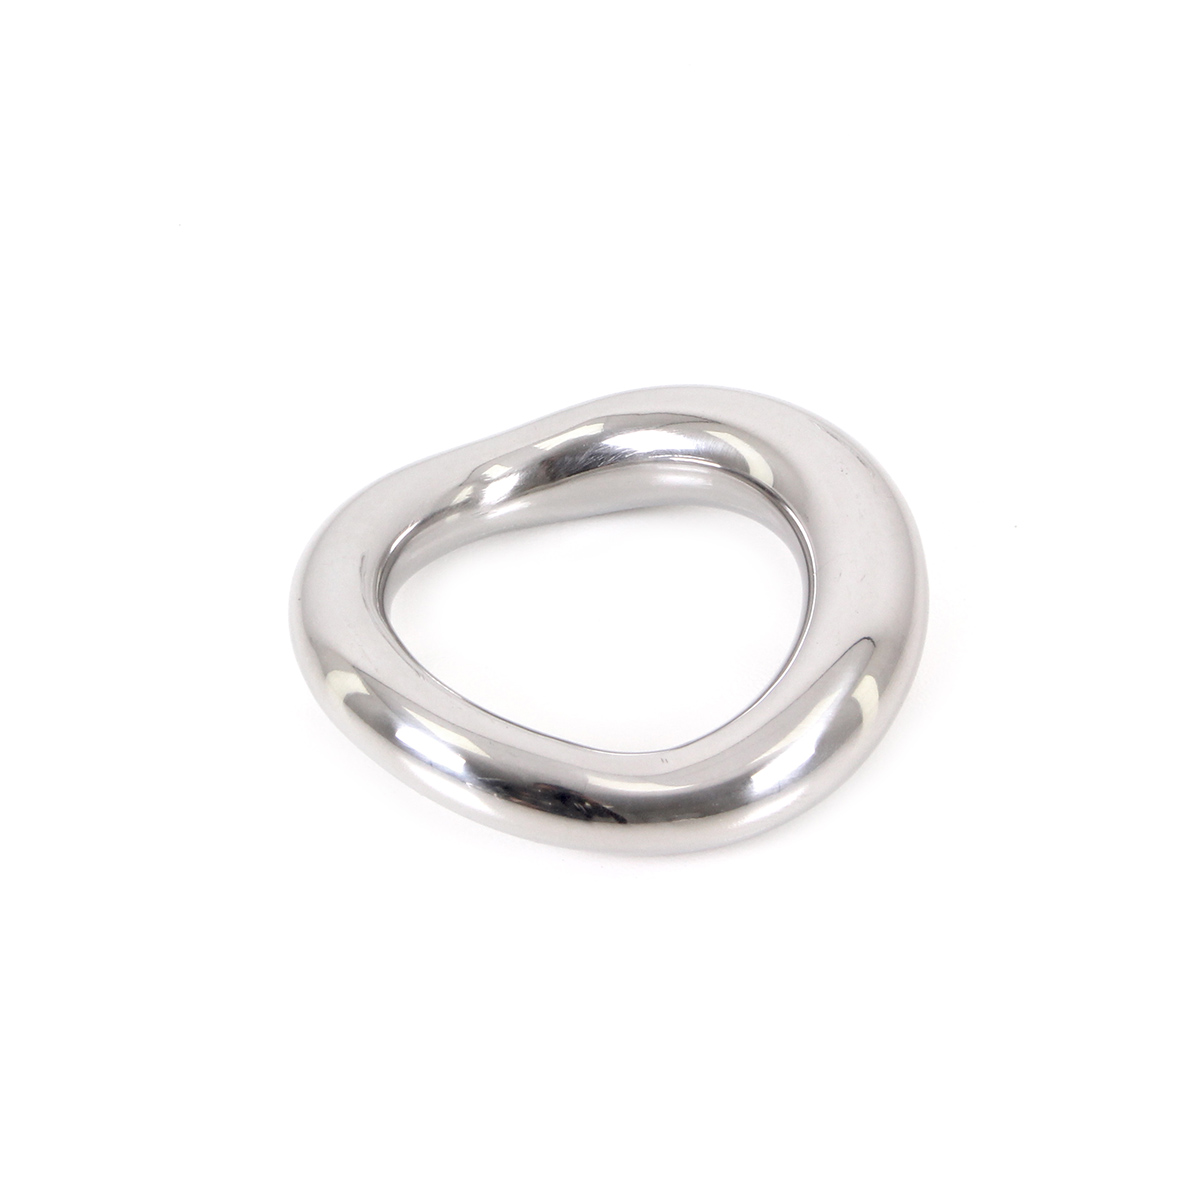 Costum-Fit-Cockring-40-mm-OPR-277044-1